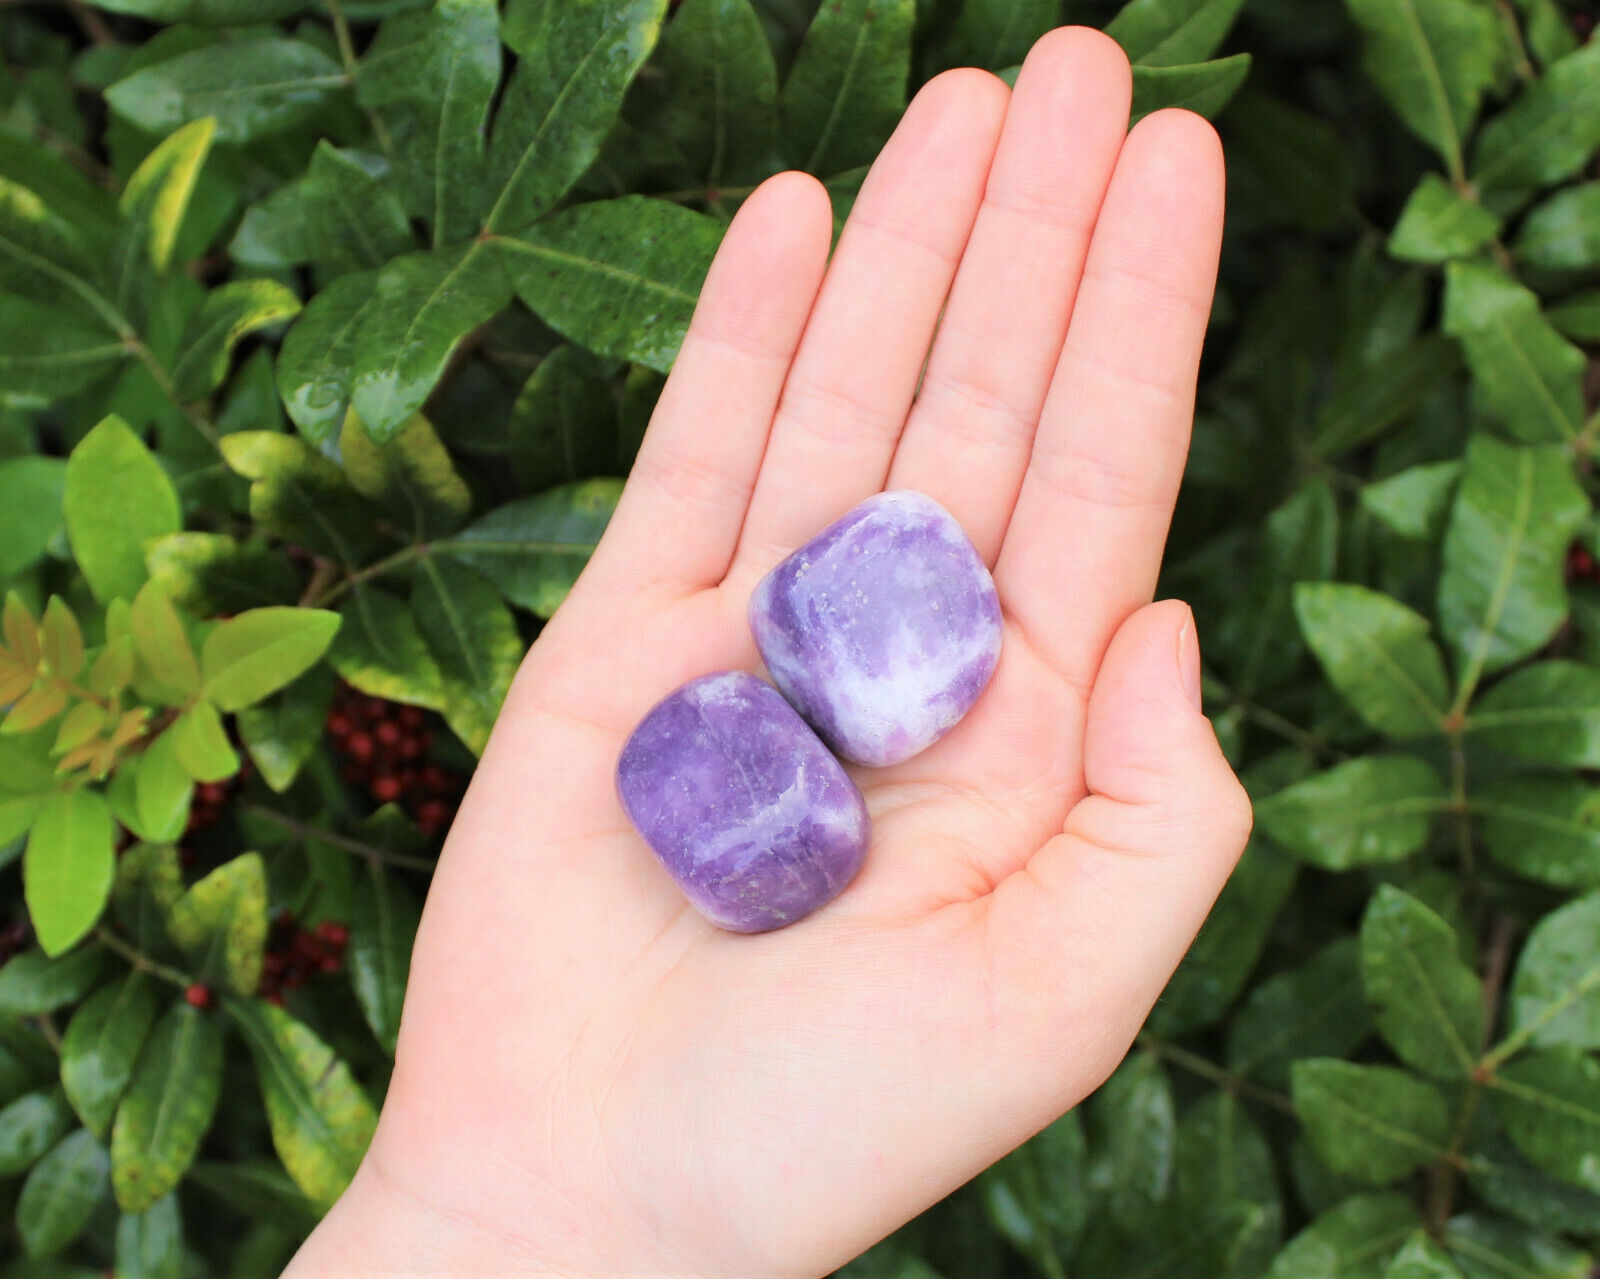 2 (Two) Pieces of Lepidolite Tumbled Stones (Crystal Healing, Purple Stone)